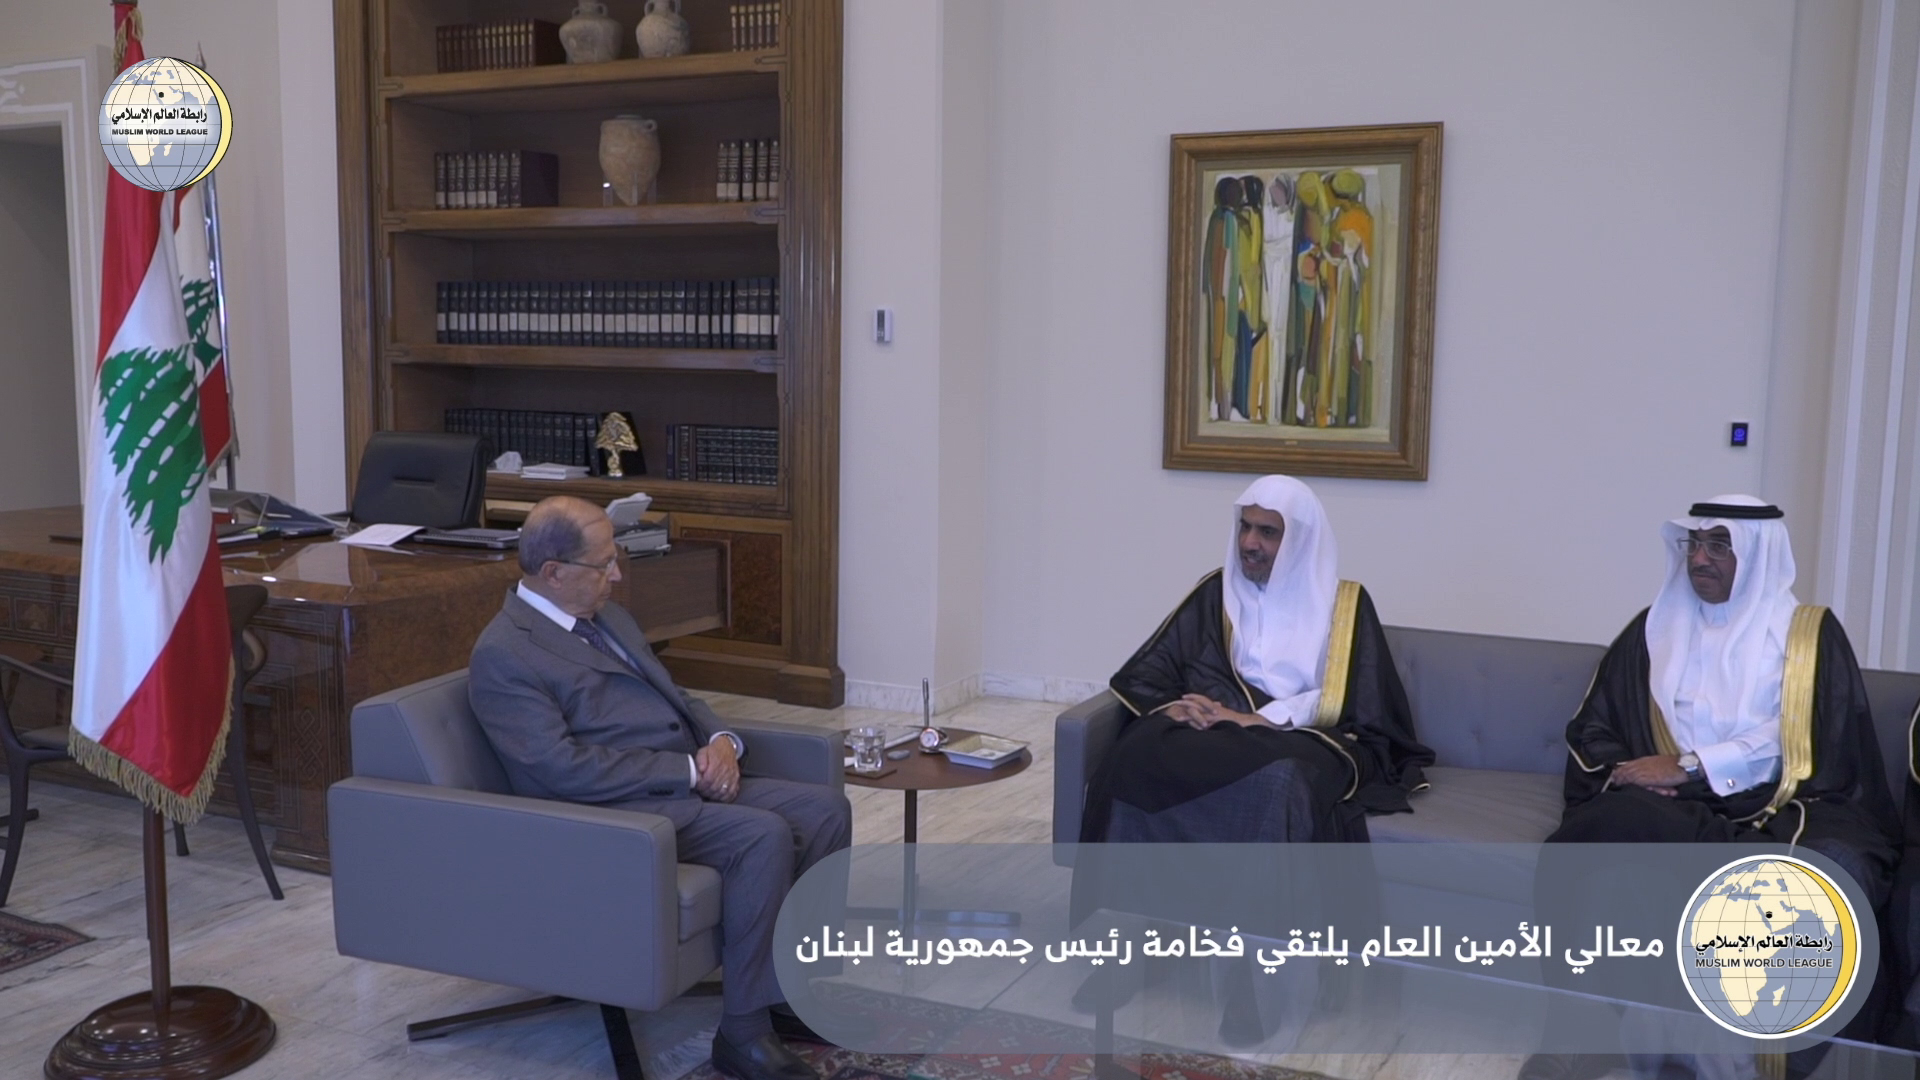 The Lebanese President receives the MWL's SG during his official visit to Lebanon